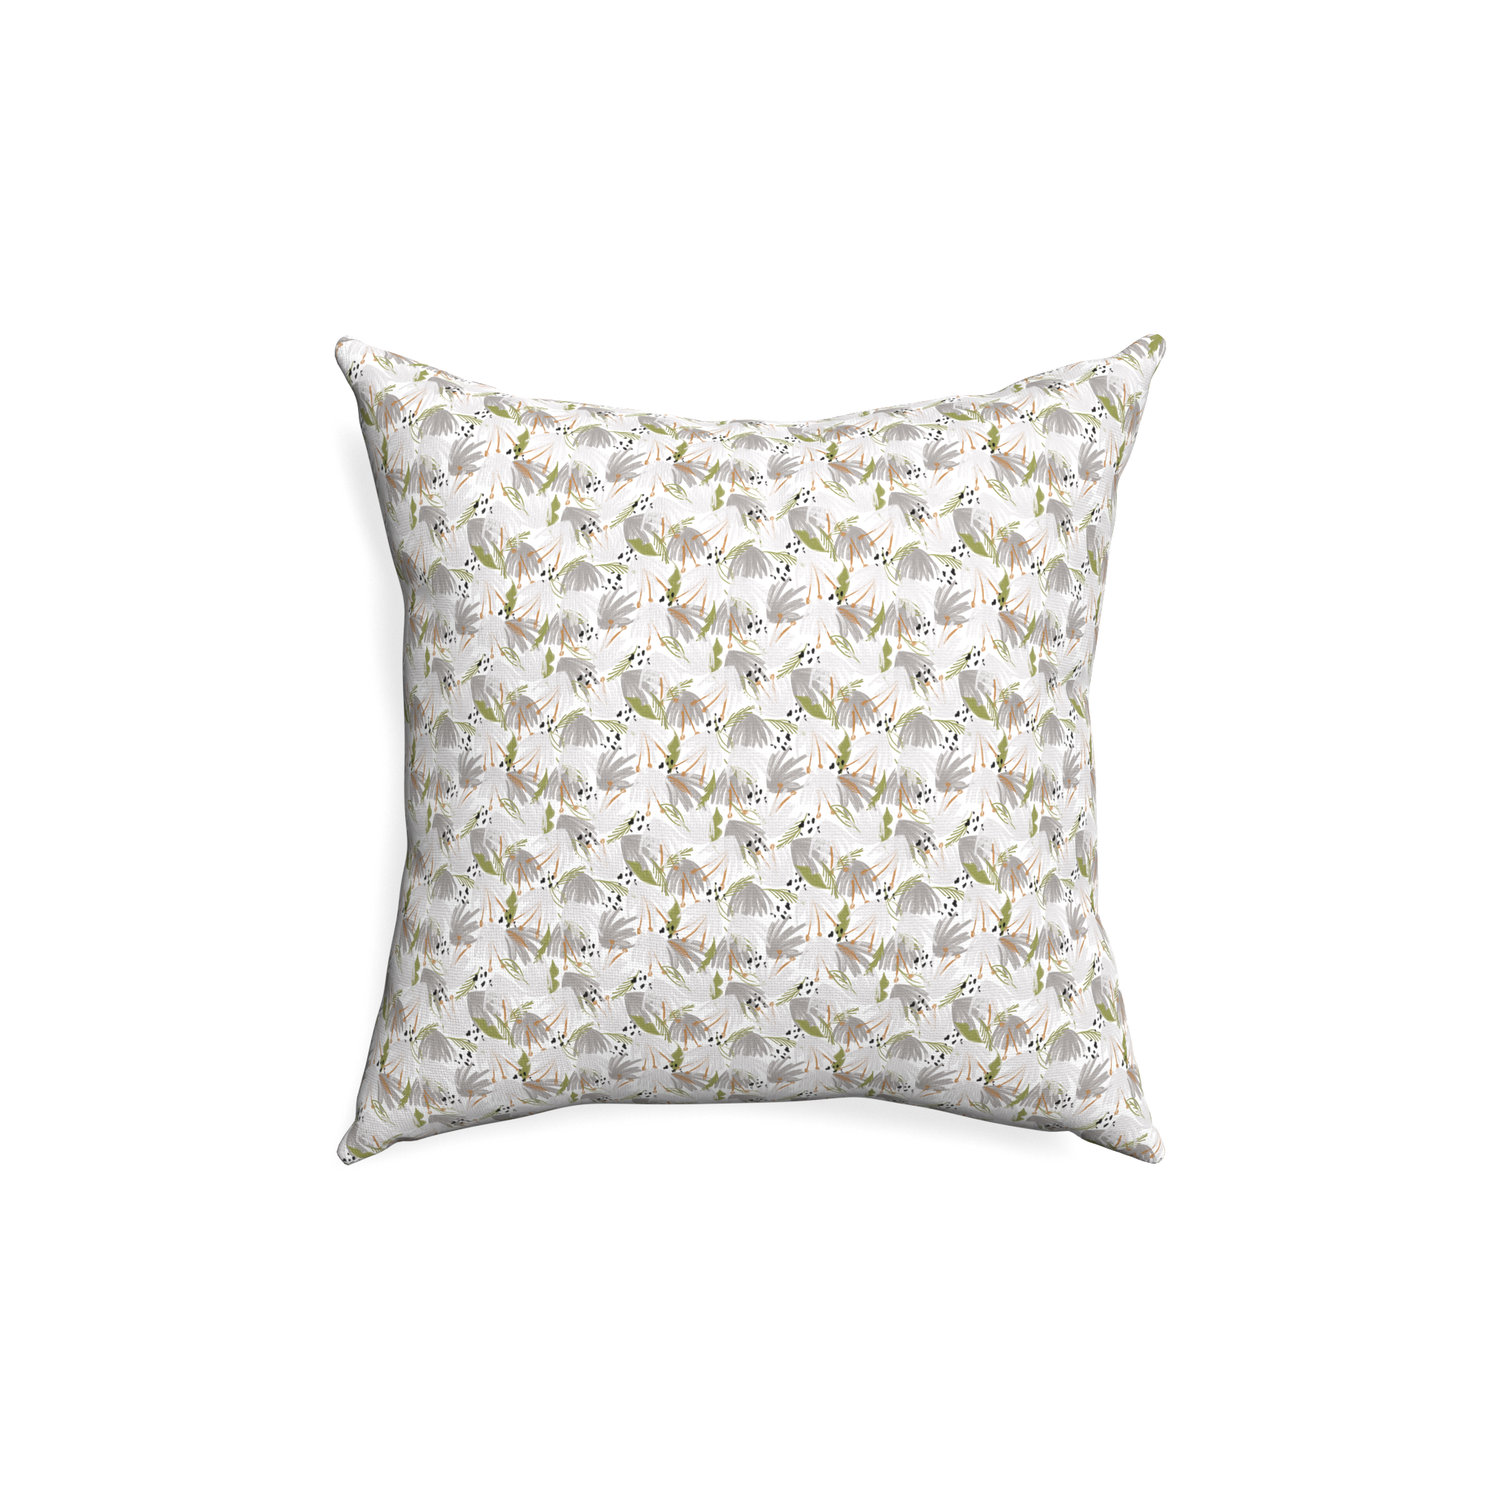 18-square eden grey custom grey floralpillow with none on white background